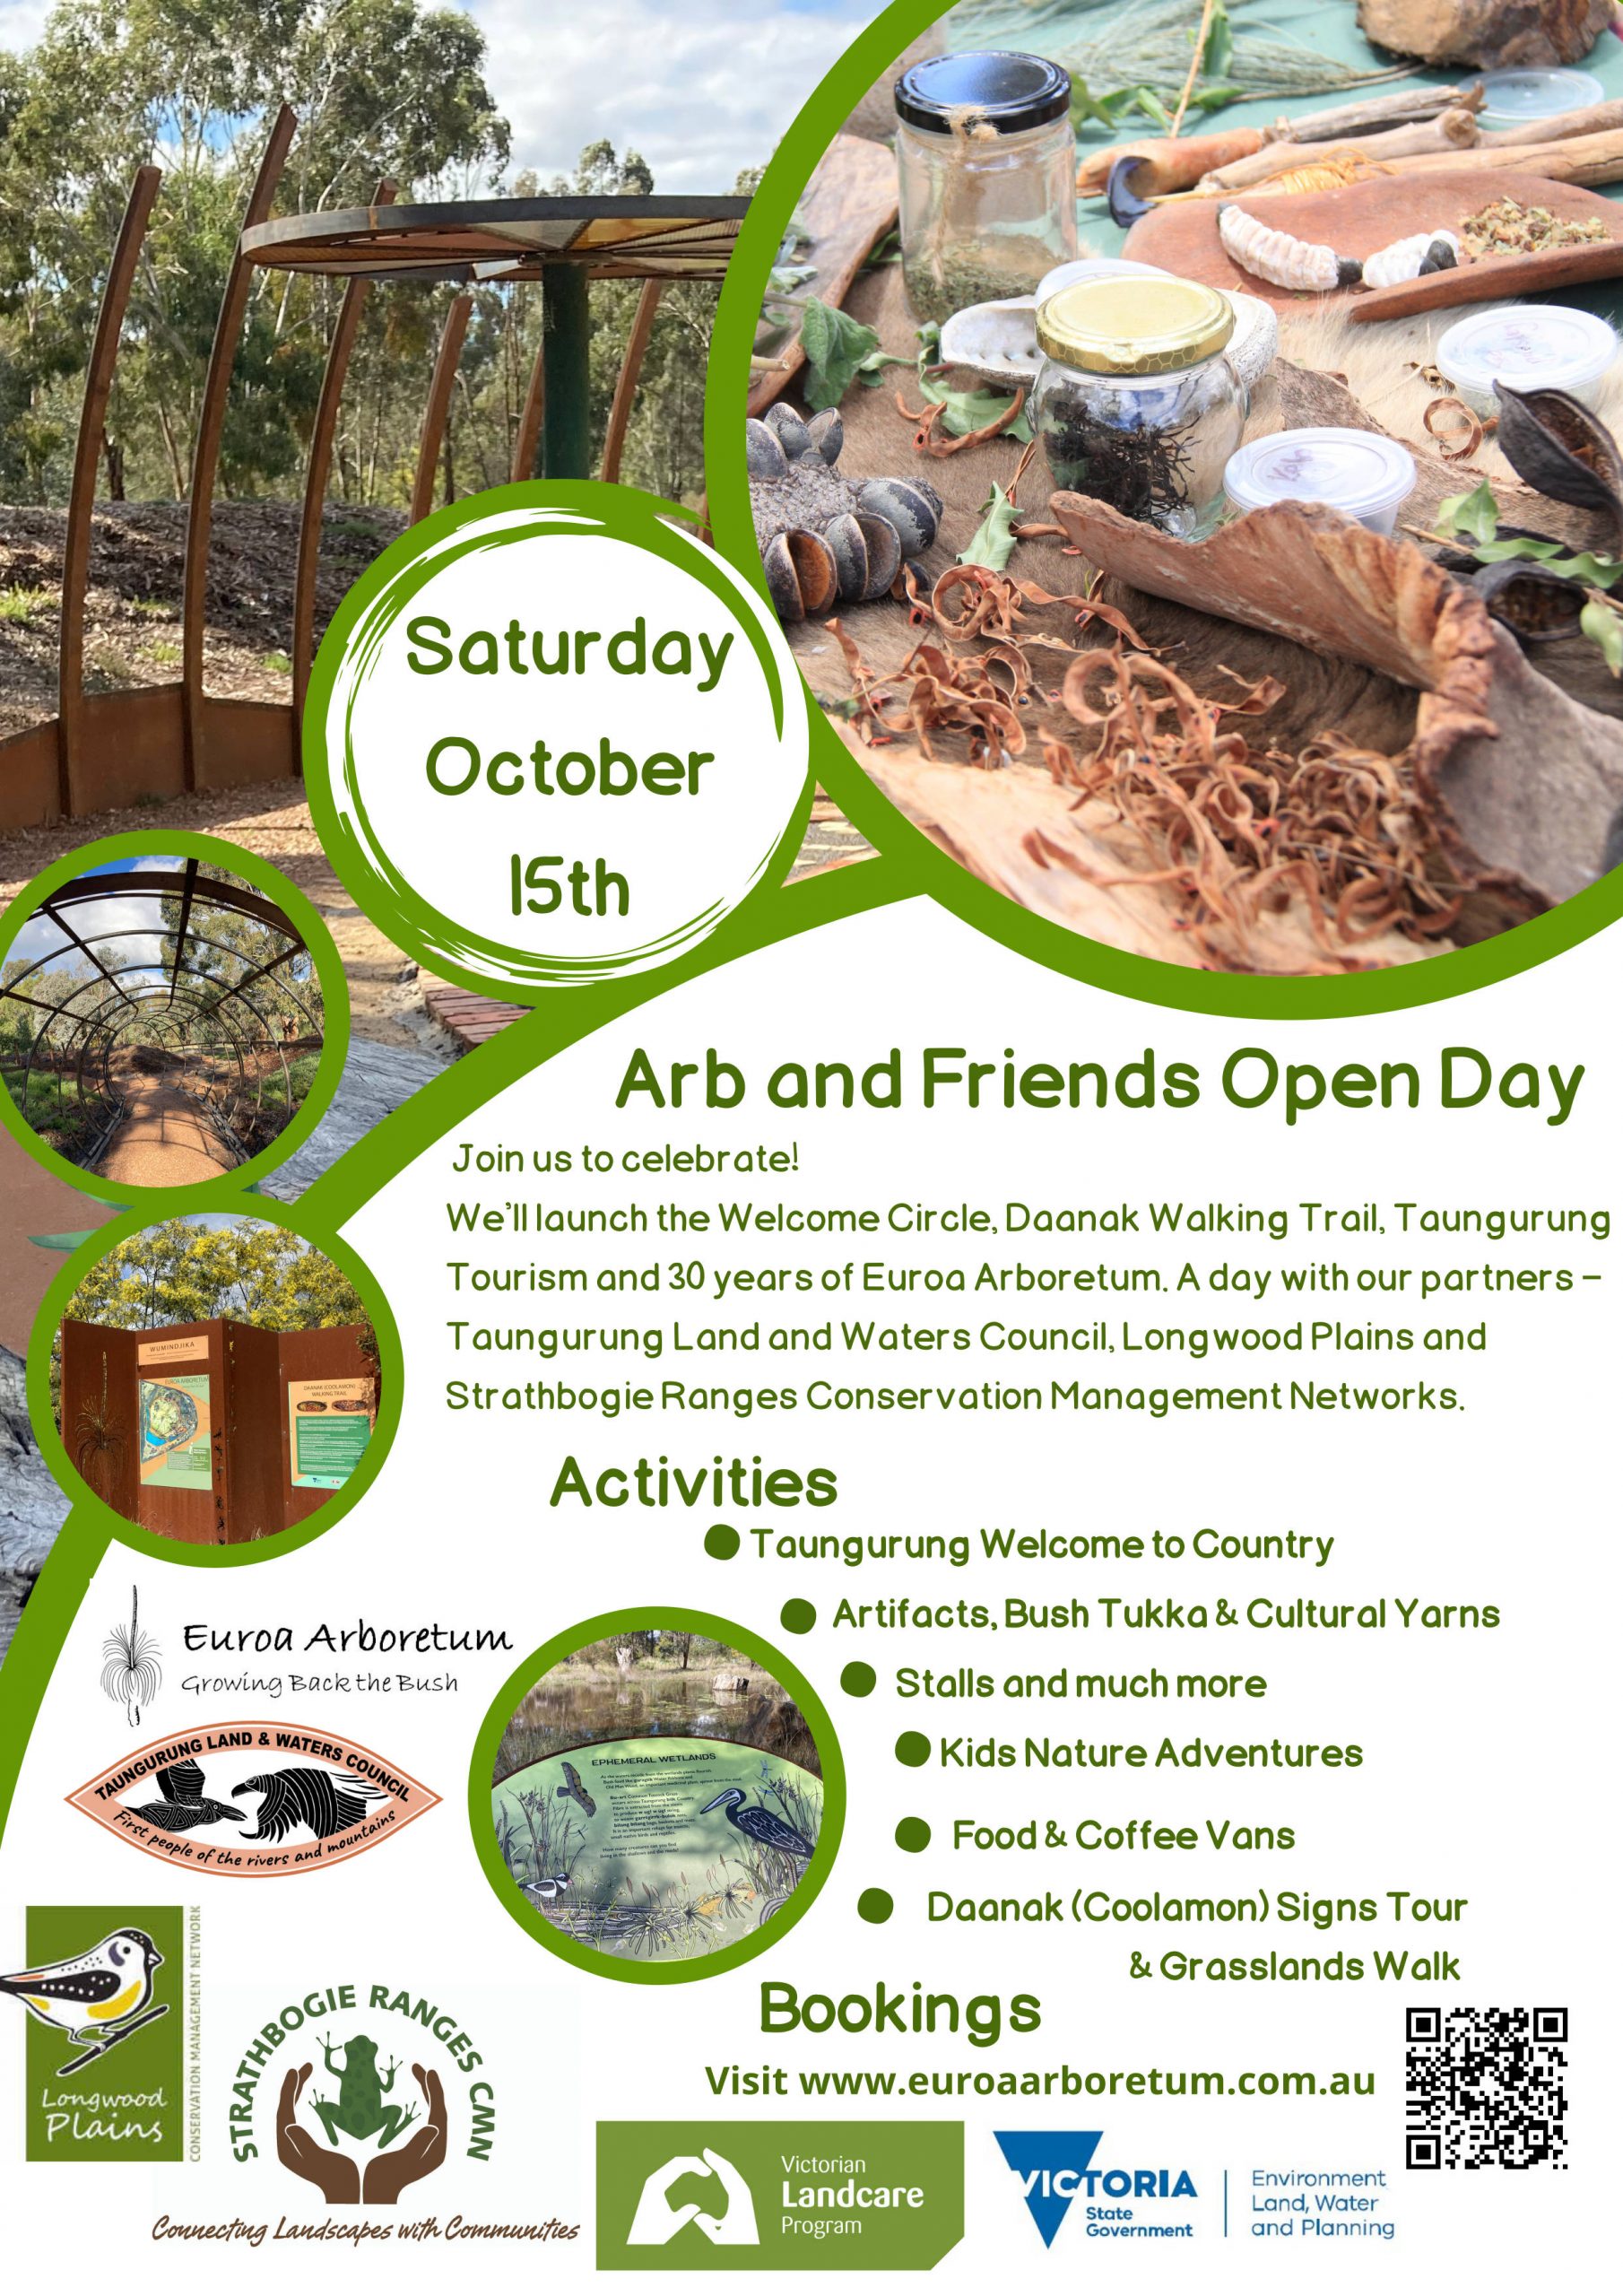 Arb and Friends Open Day